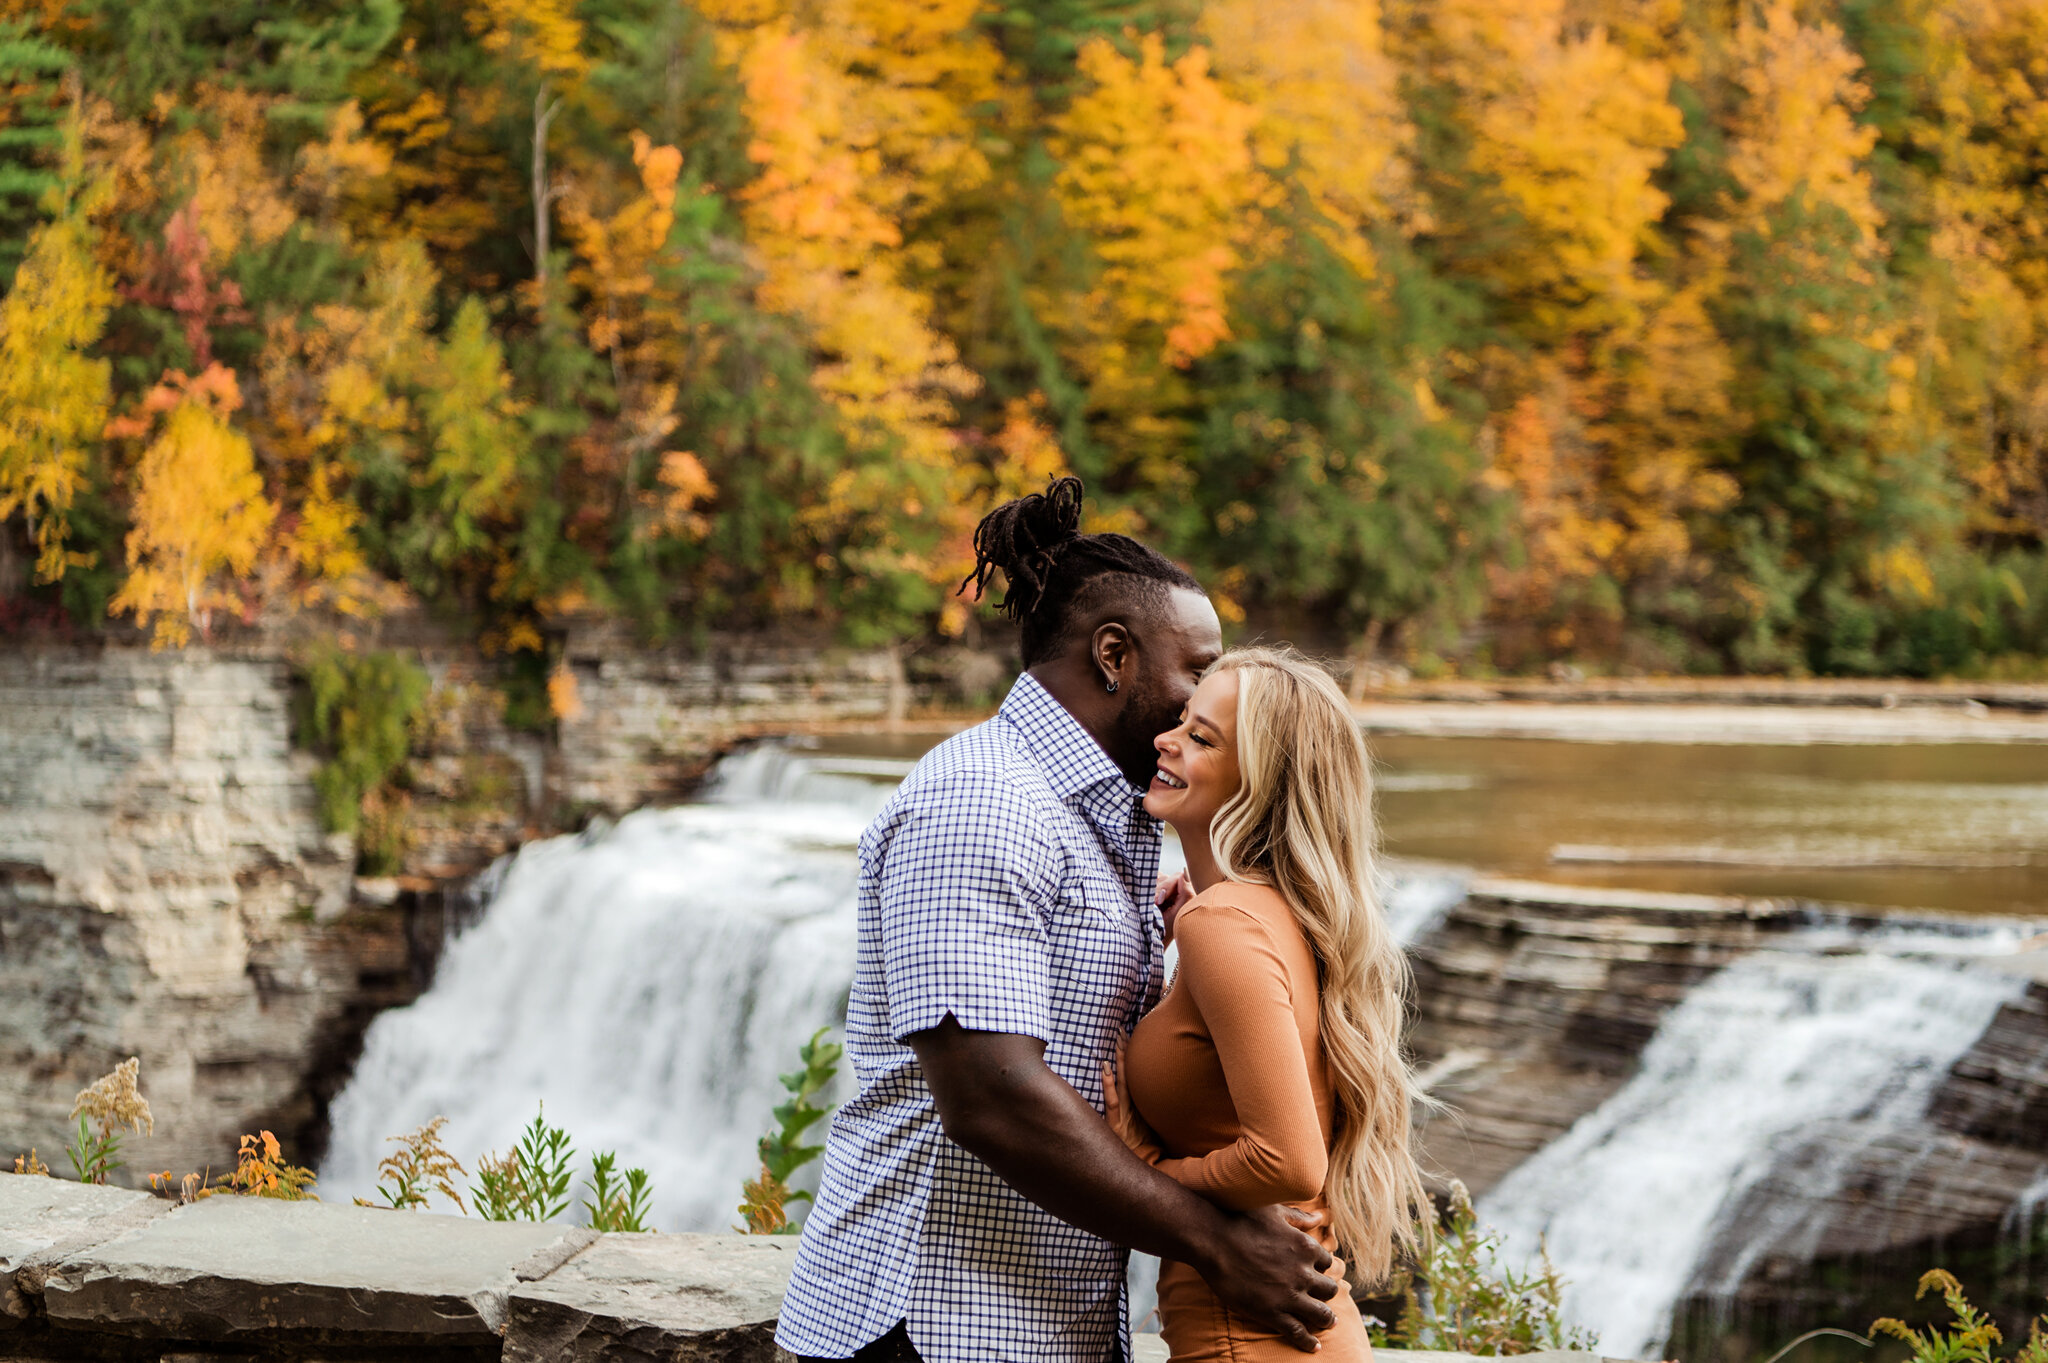 Letchworth_State_Park_Rochester_Couples_Session_JILL_STUDIO_Rochester_NY_Photographer_9141.jpg